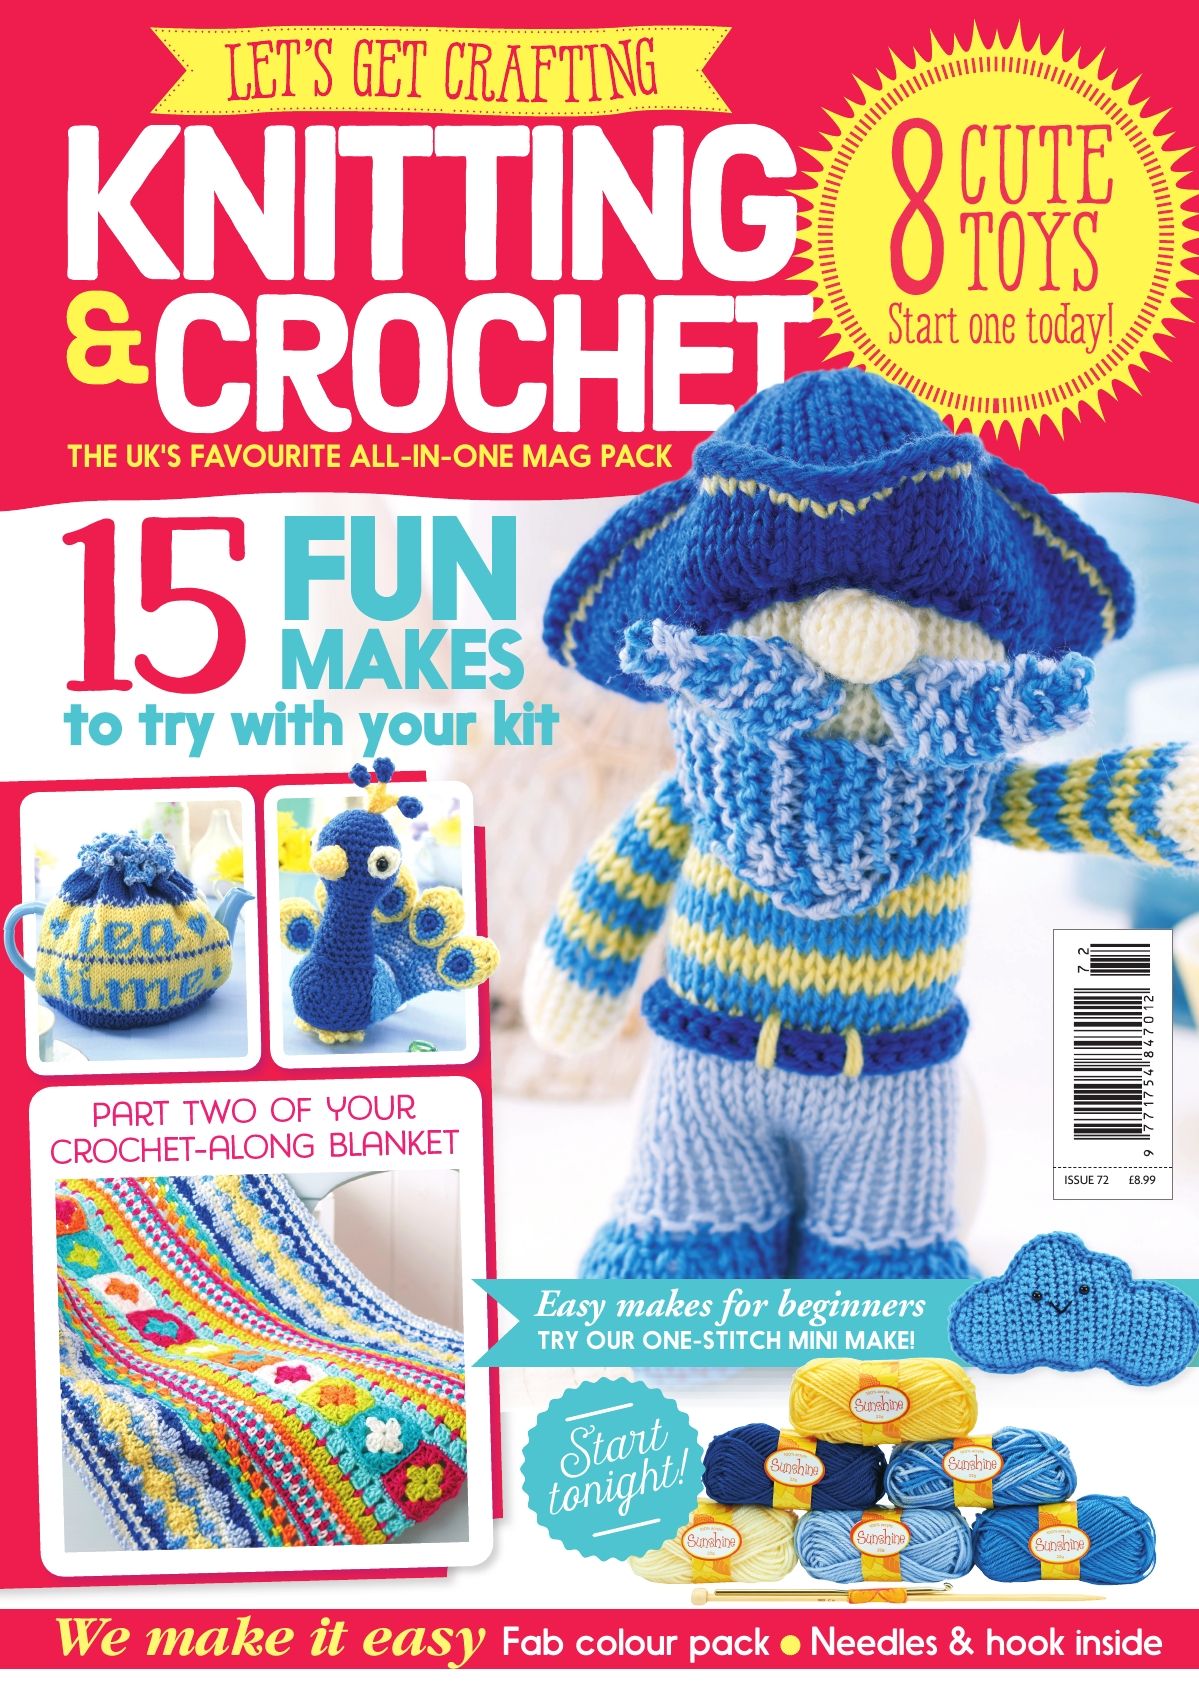 Issue 72 on sale 19 June